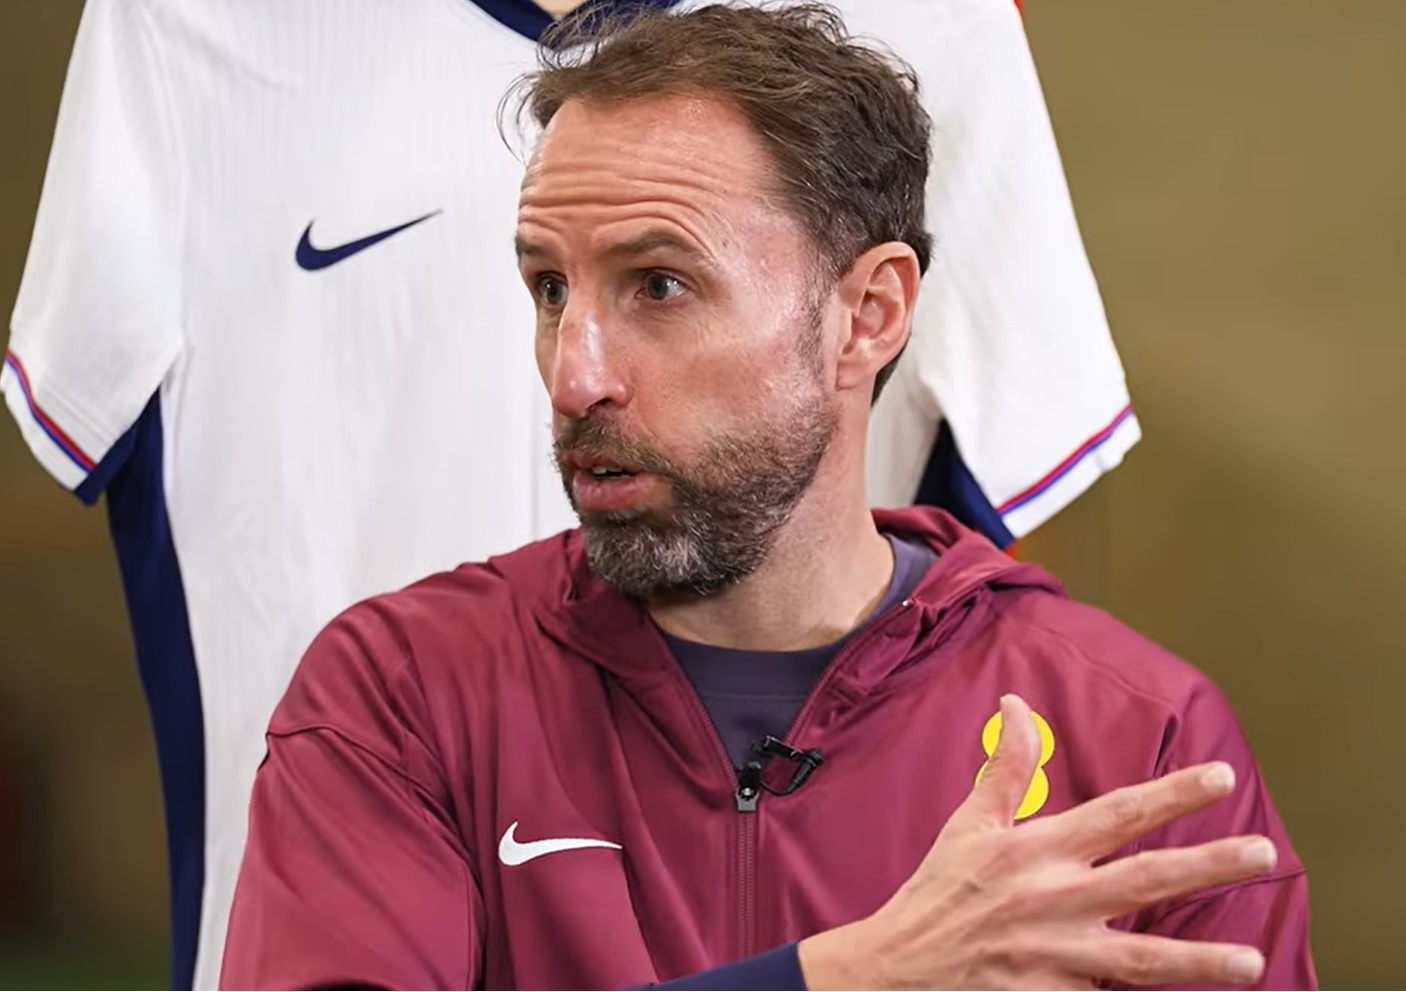 Sky reporter’s update on what Southgate plans to do now will further exasperate Liverpool fans